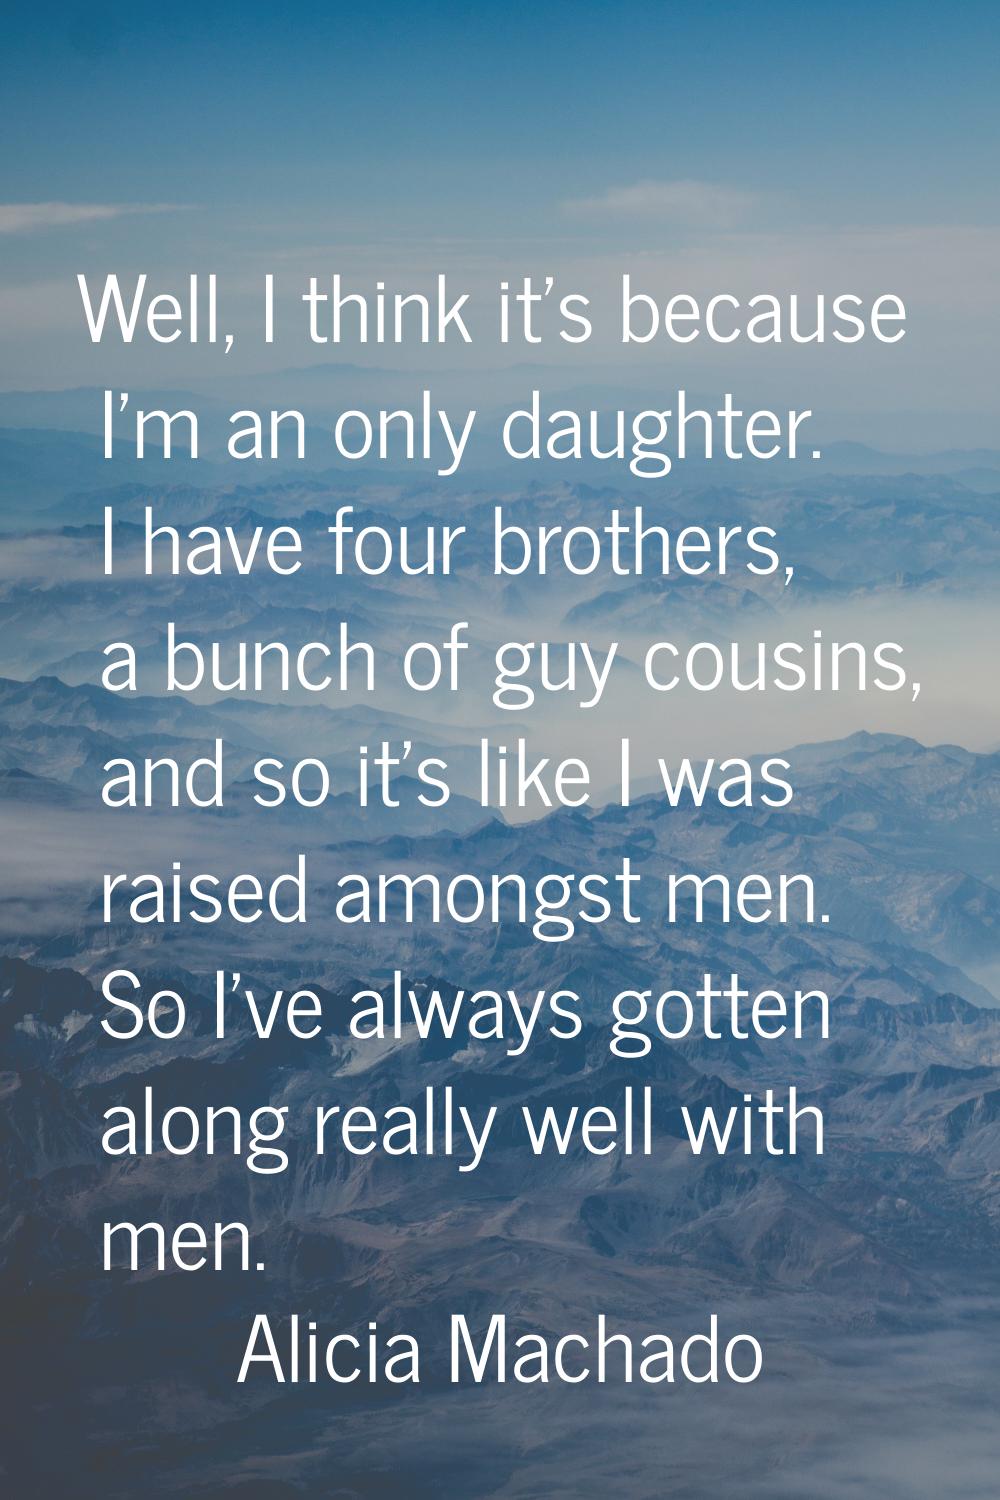 Well, I think it's because I'm an only daughter. I have four brothers, a bunch of guy cousins, and 